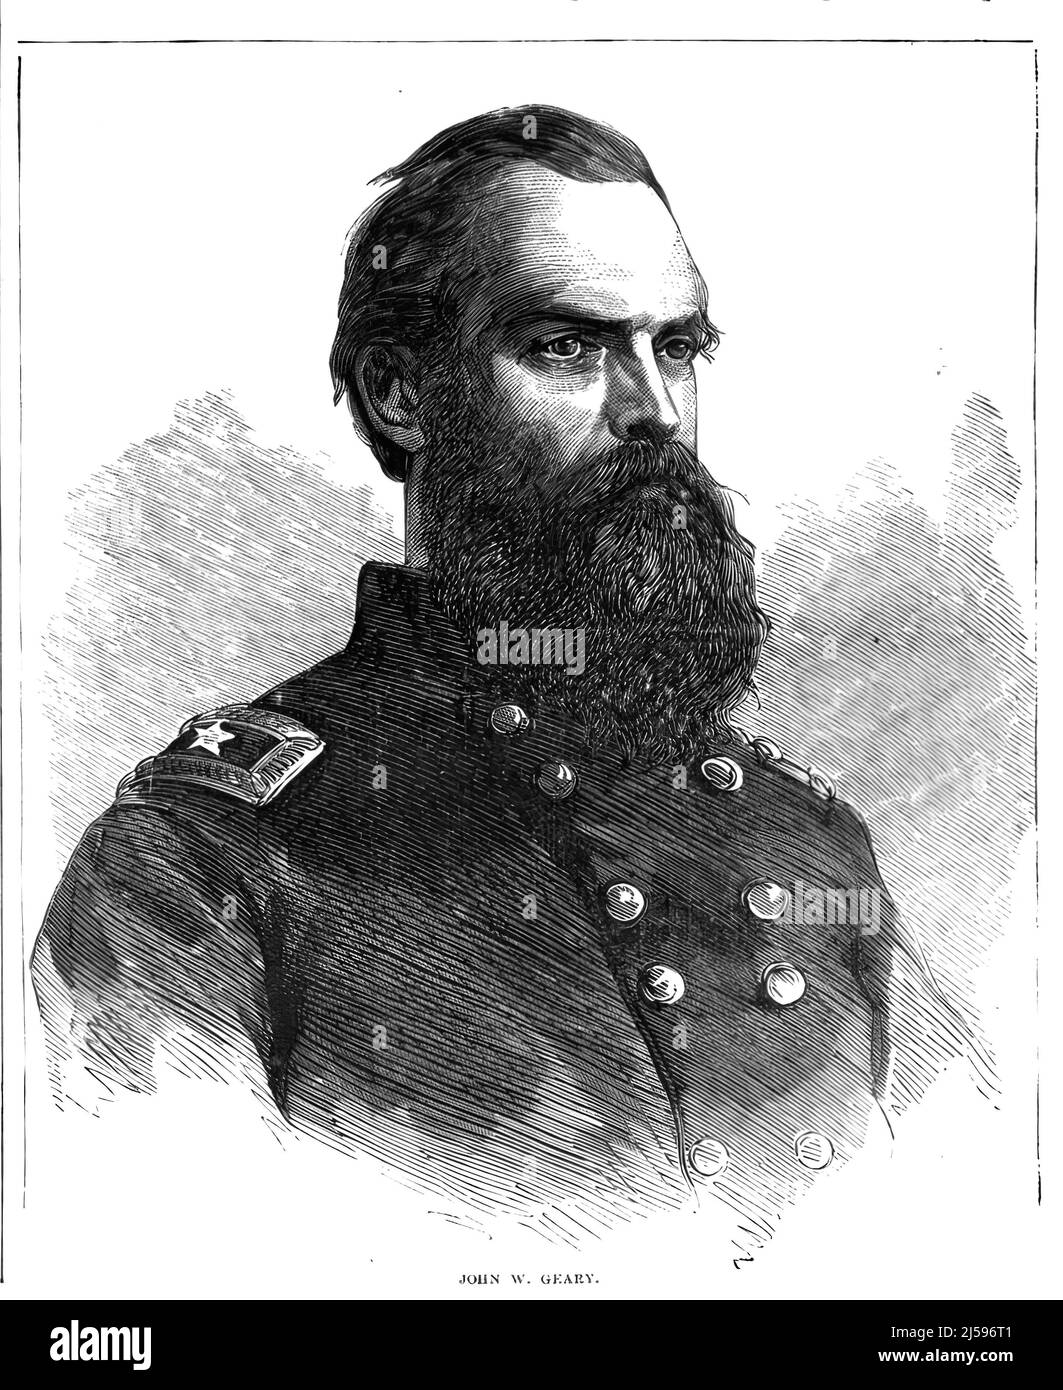 Portrait of John White Geary, Union Army General in the American Civil War. 19th century illustration Stock Photo